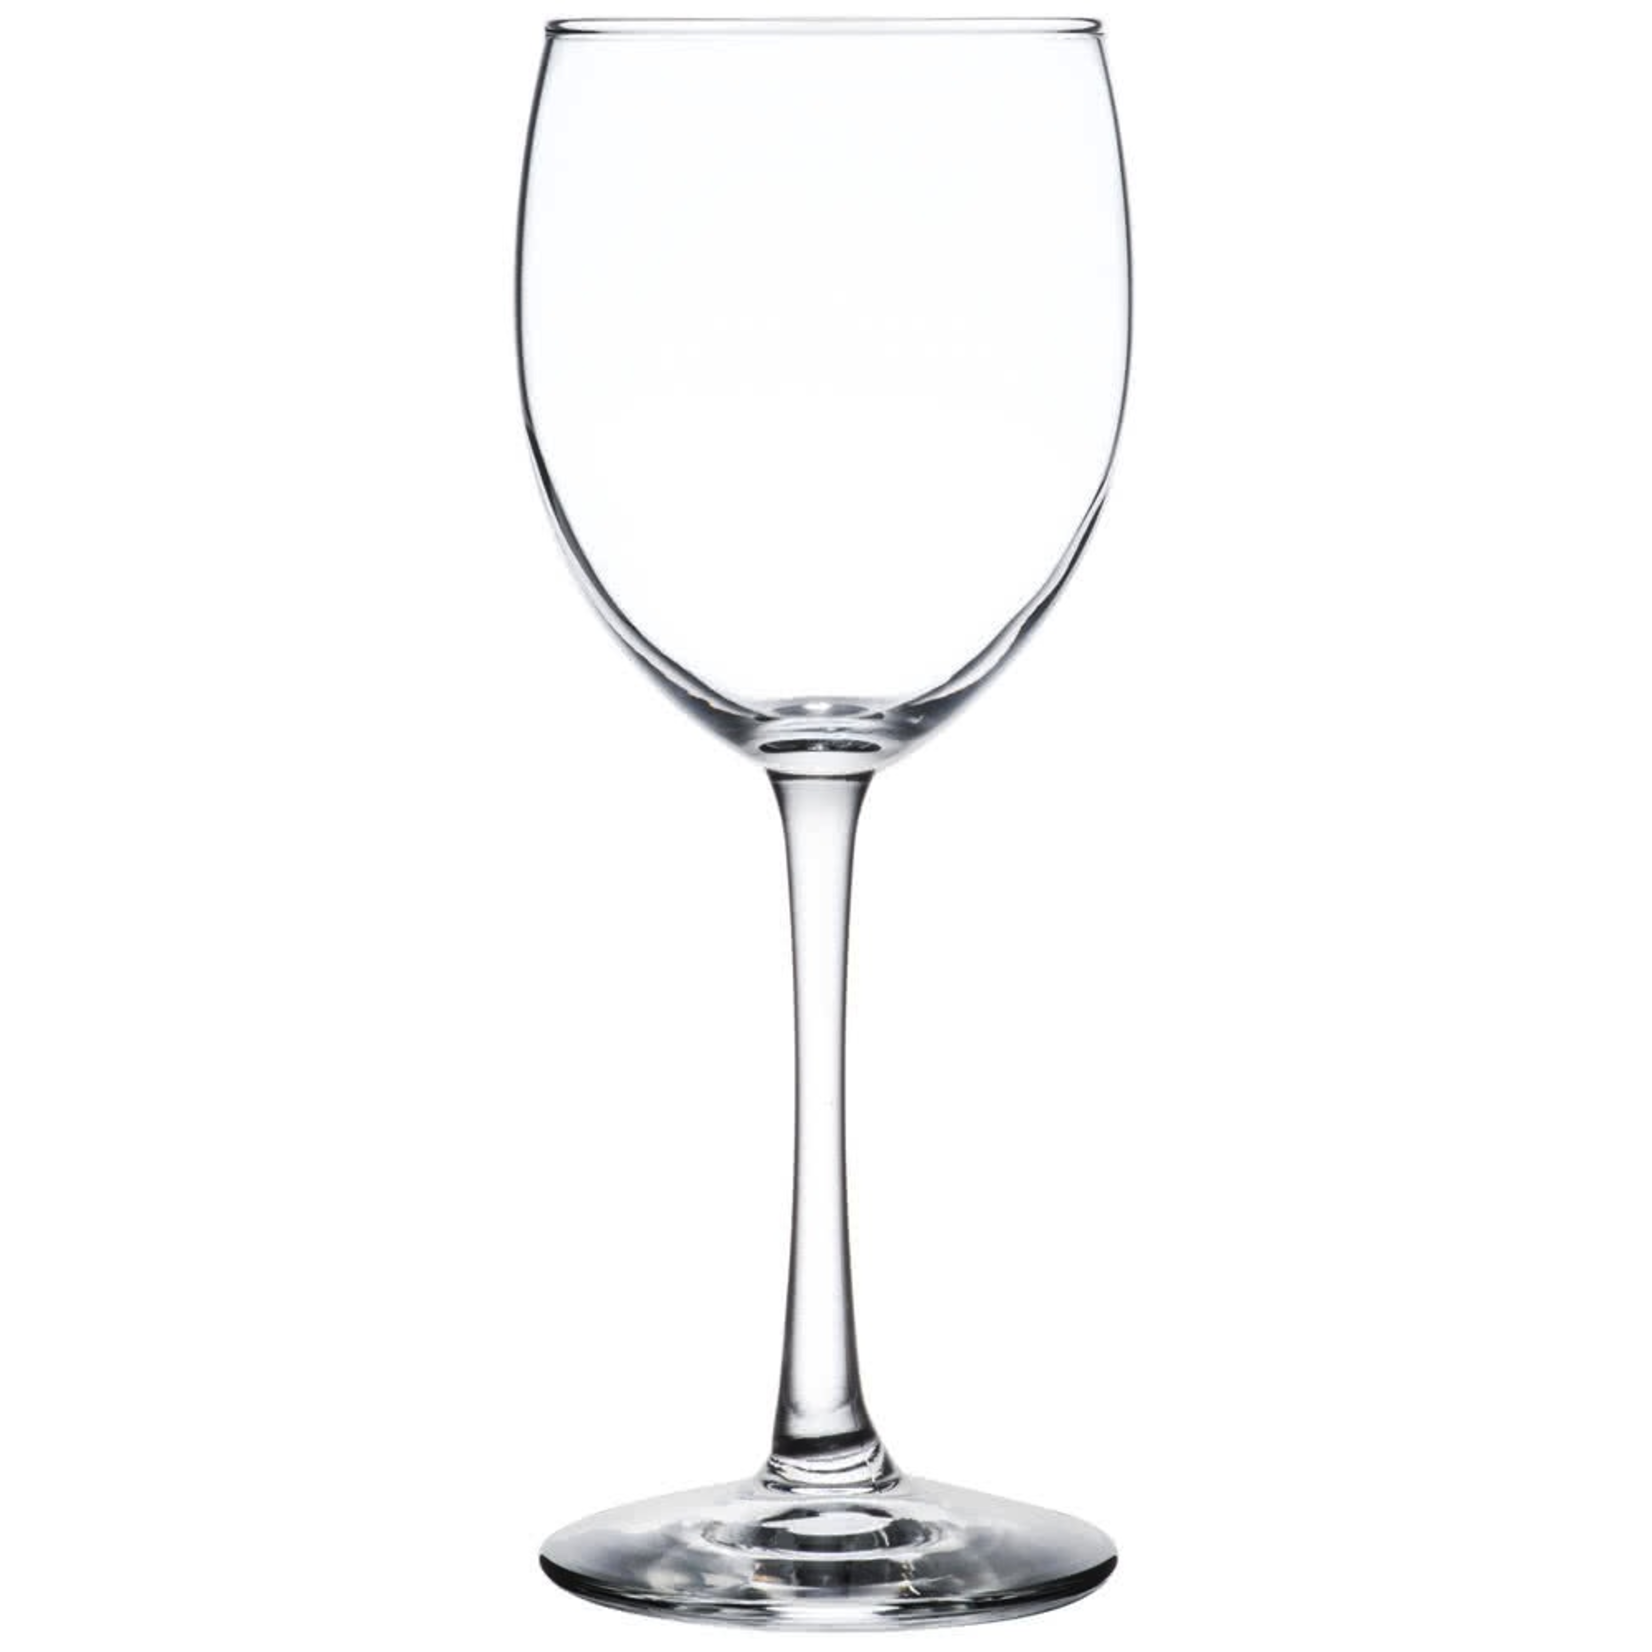 LIBBEY 7502 special order Libbey 12 oz Vina White Wine clear